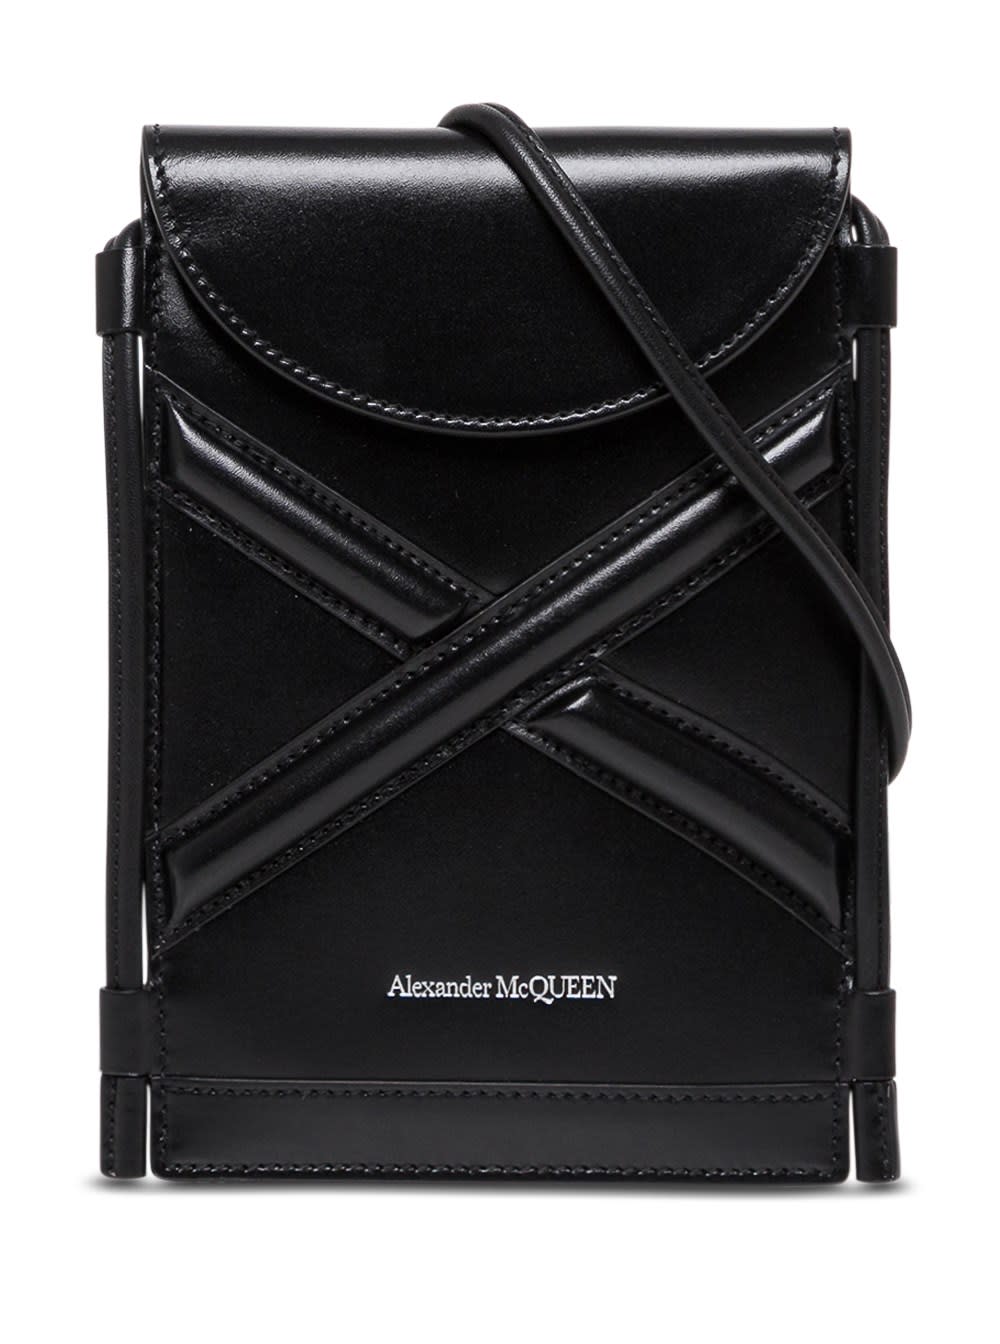 Alexander McQueen The Curve Micro Crossbody Bag In Black Leather